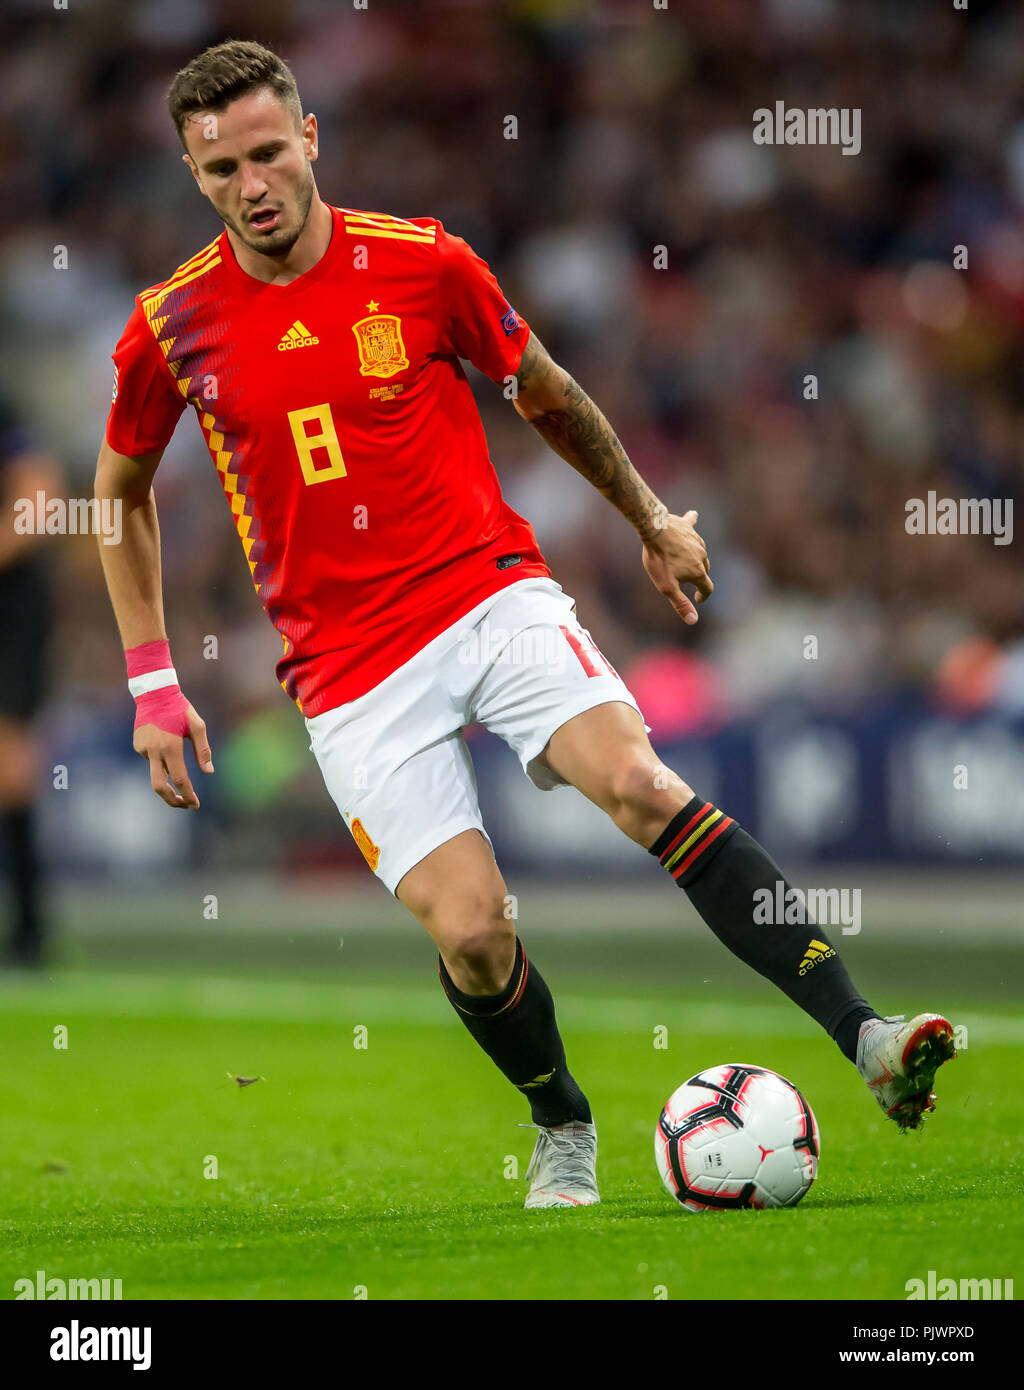 London, UK. 8th September 2018. Saul Niguez of Spain during the UEFA Nation League, Group 4, League A match between England and Spain at Wembley Stadium, London, England on 8 September 2018. 8th Sep, 2018. Photo by Salvio Calabrese Credit: AFP7/ZUMA Wire/Alamy Live News Stock Photo